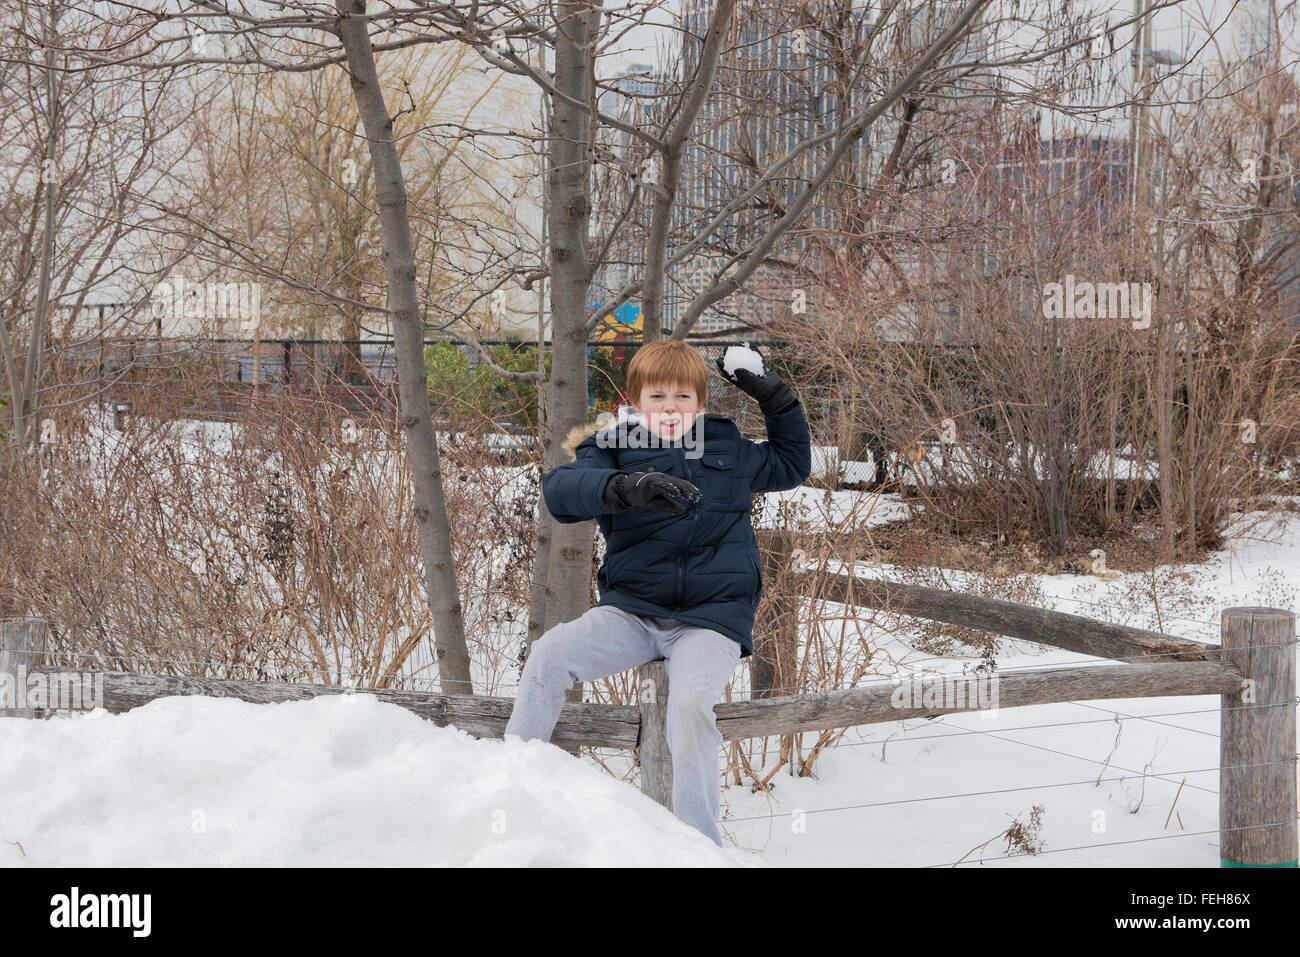 Young boy sitting on a wooden fence preparing to throw a snowball Stock Photo